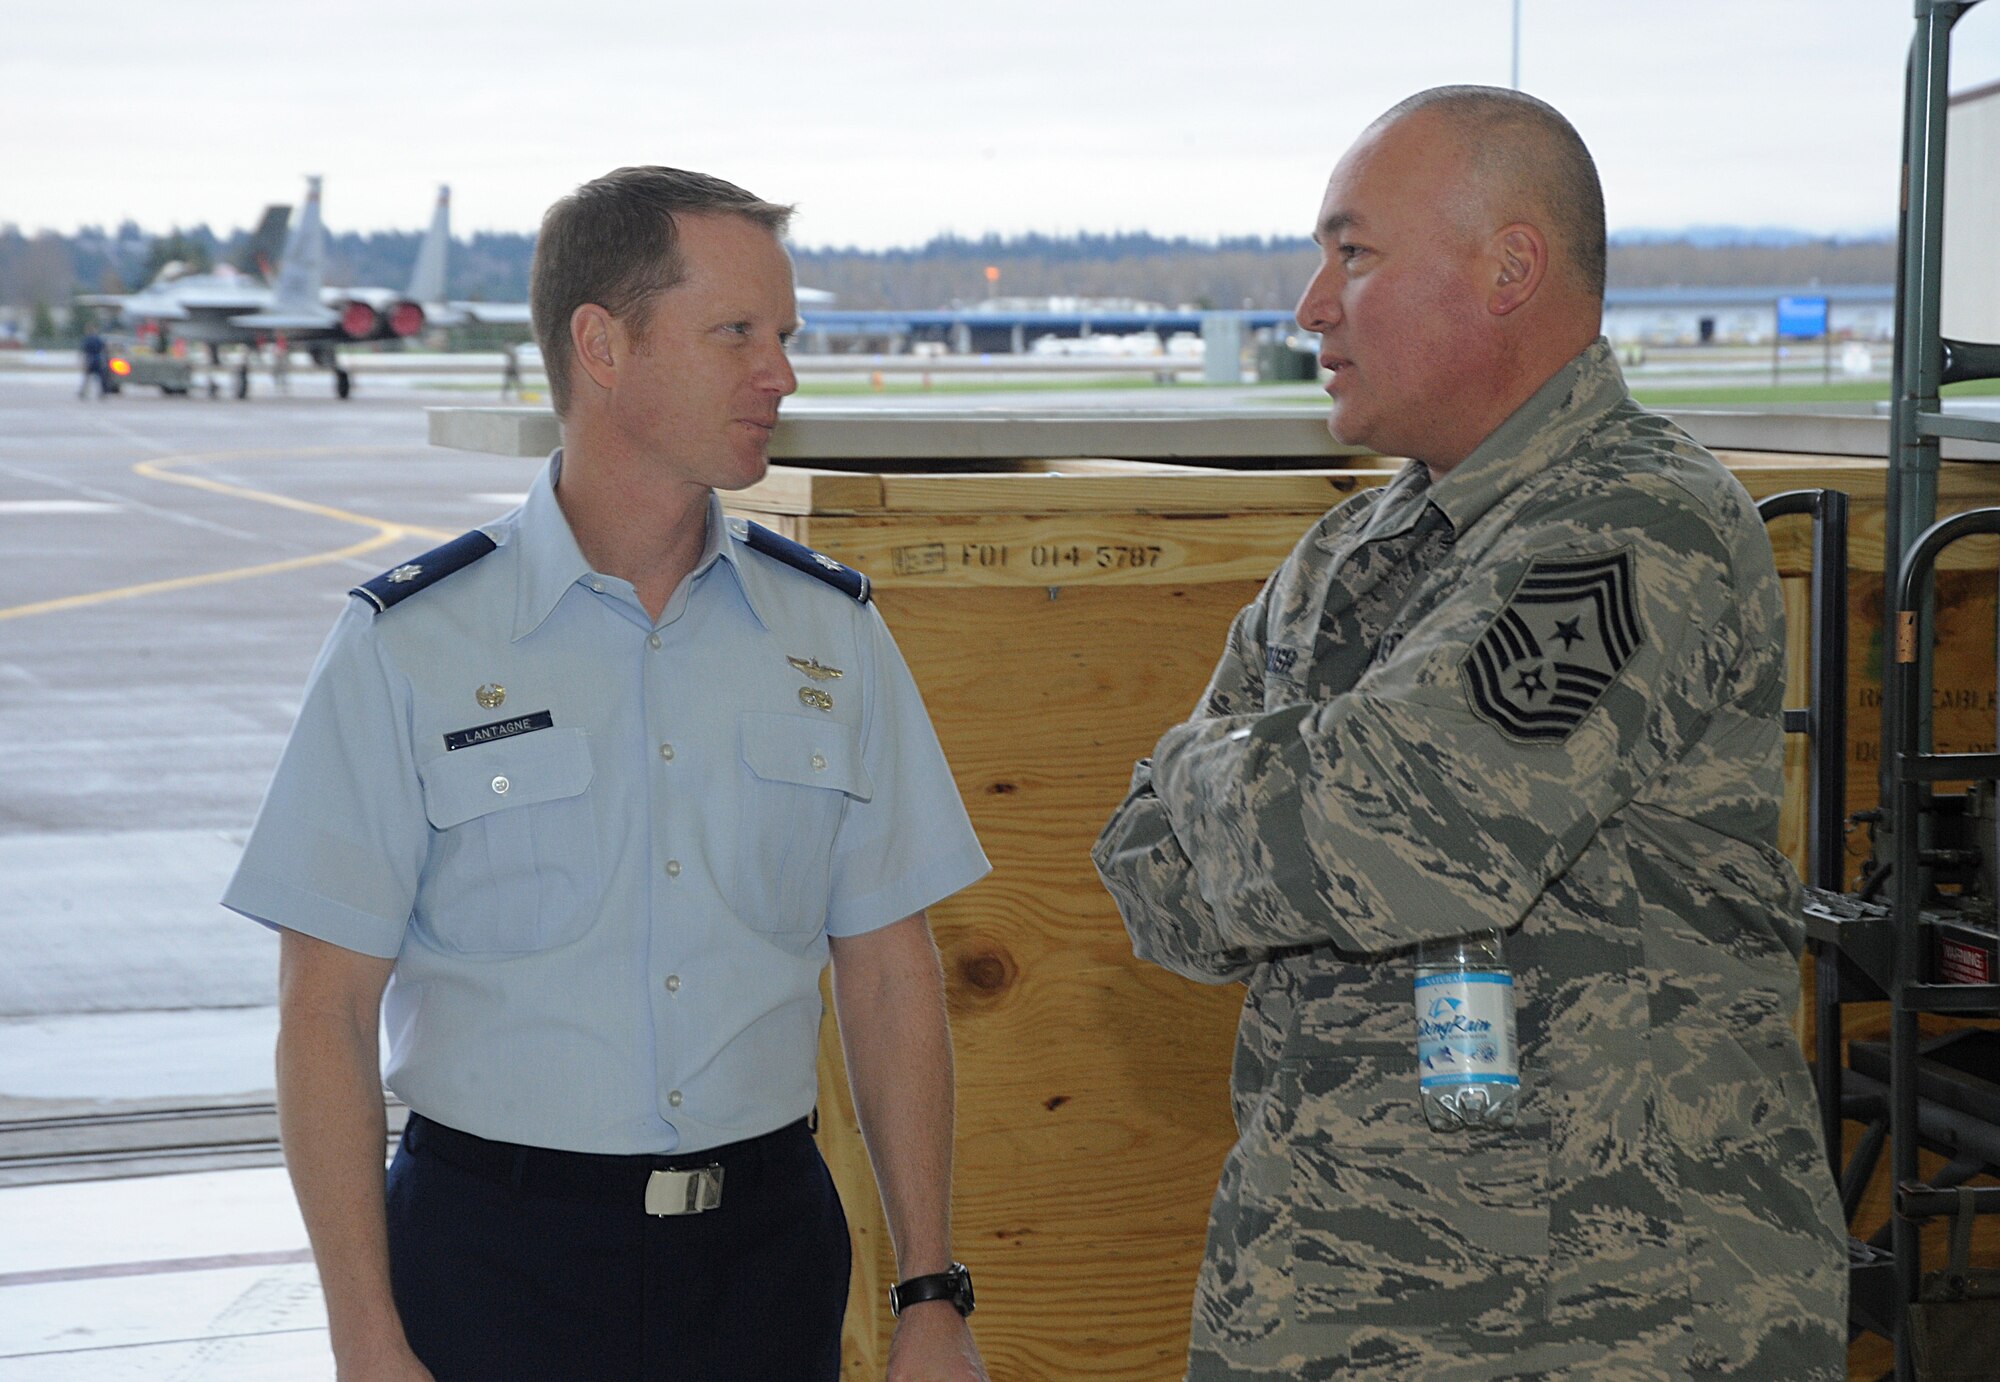 Lt. Col. Christopher Lantagne, 142nd Fighter Wing Aircraft Maintenance Squadron commander, left, talks with Chief Master Sgt. Mitchell O. Brush, Senior Enlisted Advisor for the National Guard Bureau, right, during his tour of the Portland Air National Guard Base, Ore., Jan. 5, 2015. Chief Brush took time to meet Airmen in various areas of the air base to get a better understanding of their roles as members of the Air National Guard. (U.S. Air National Guard photo by Tech. Sgt. John Hughel, 142nd Fighter Wing Public Affairs/Released)